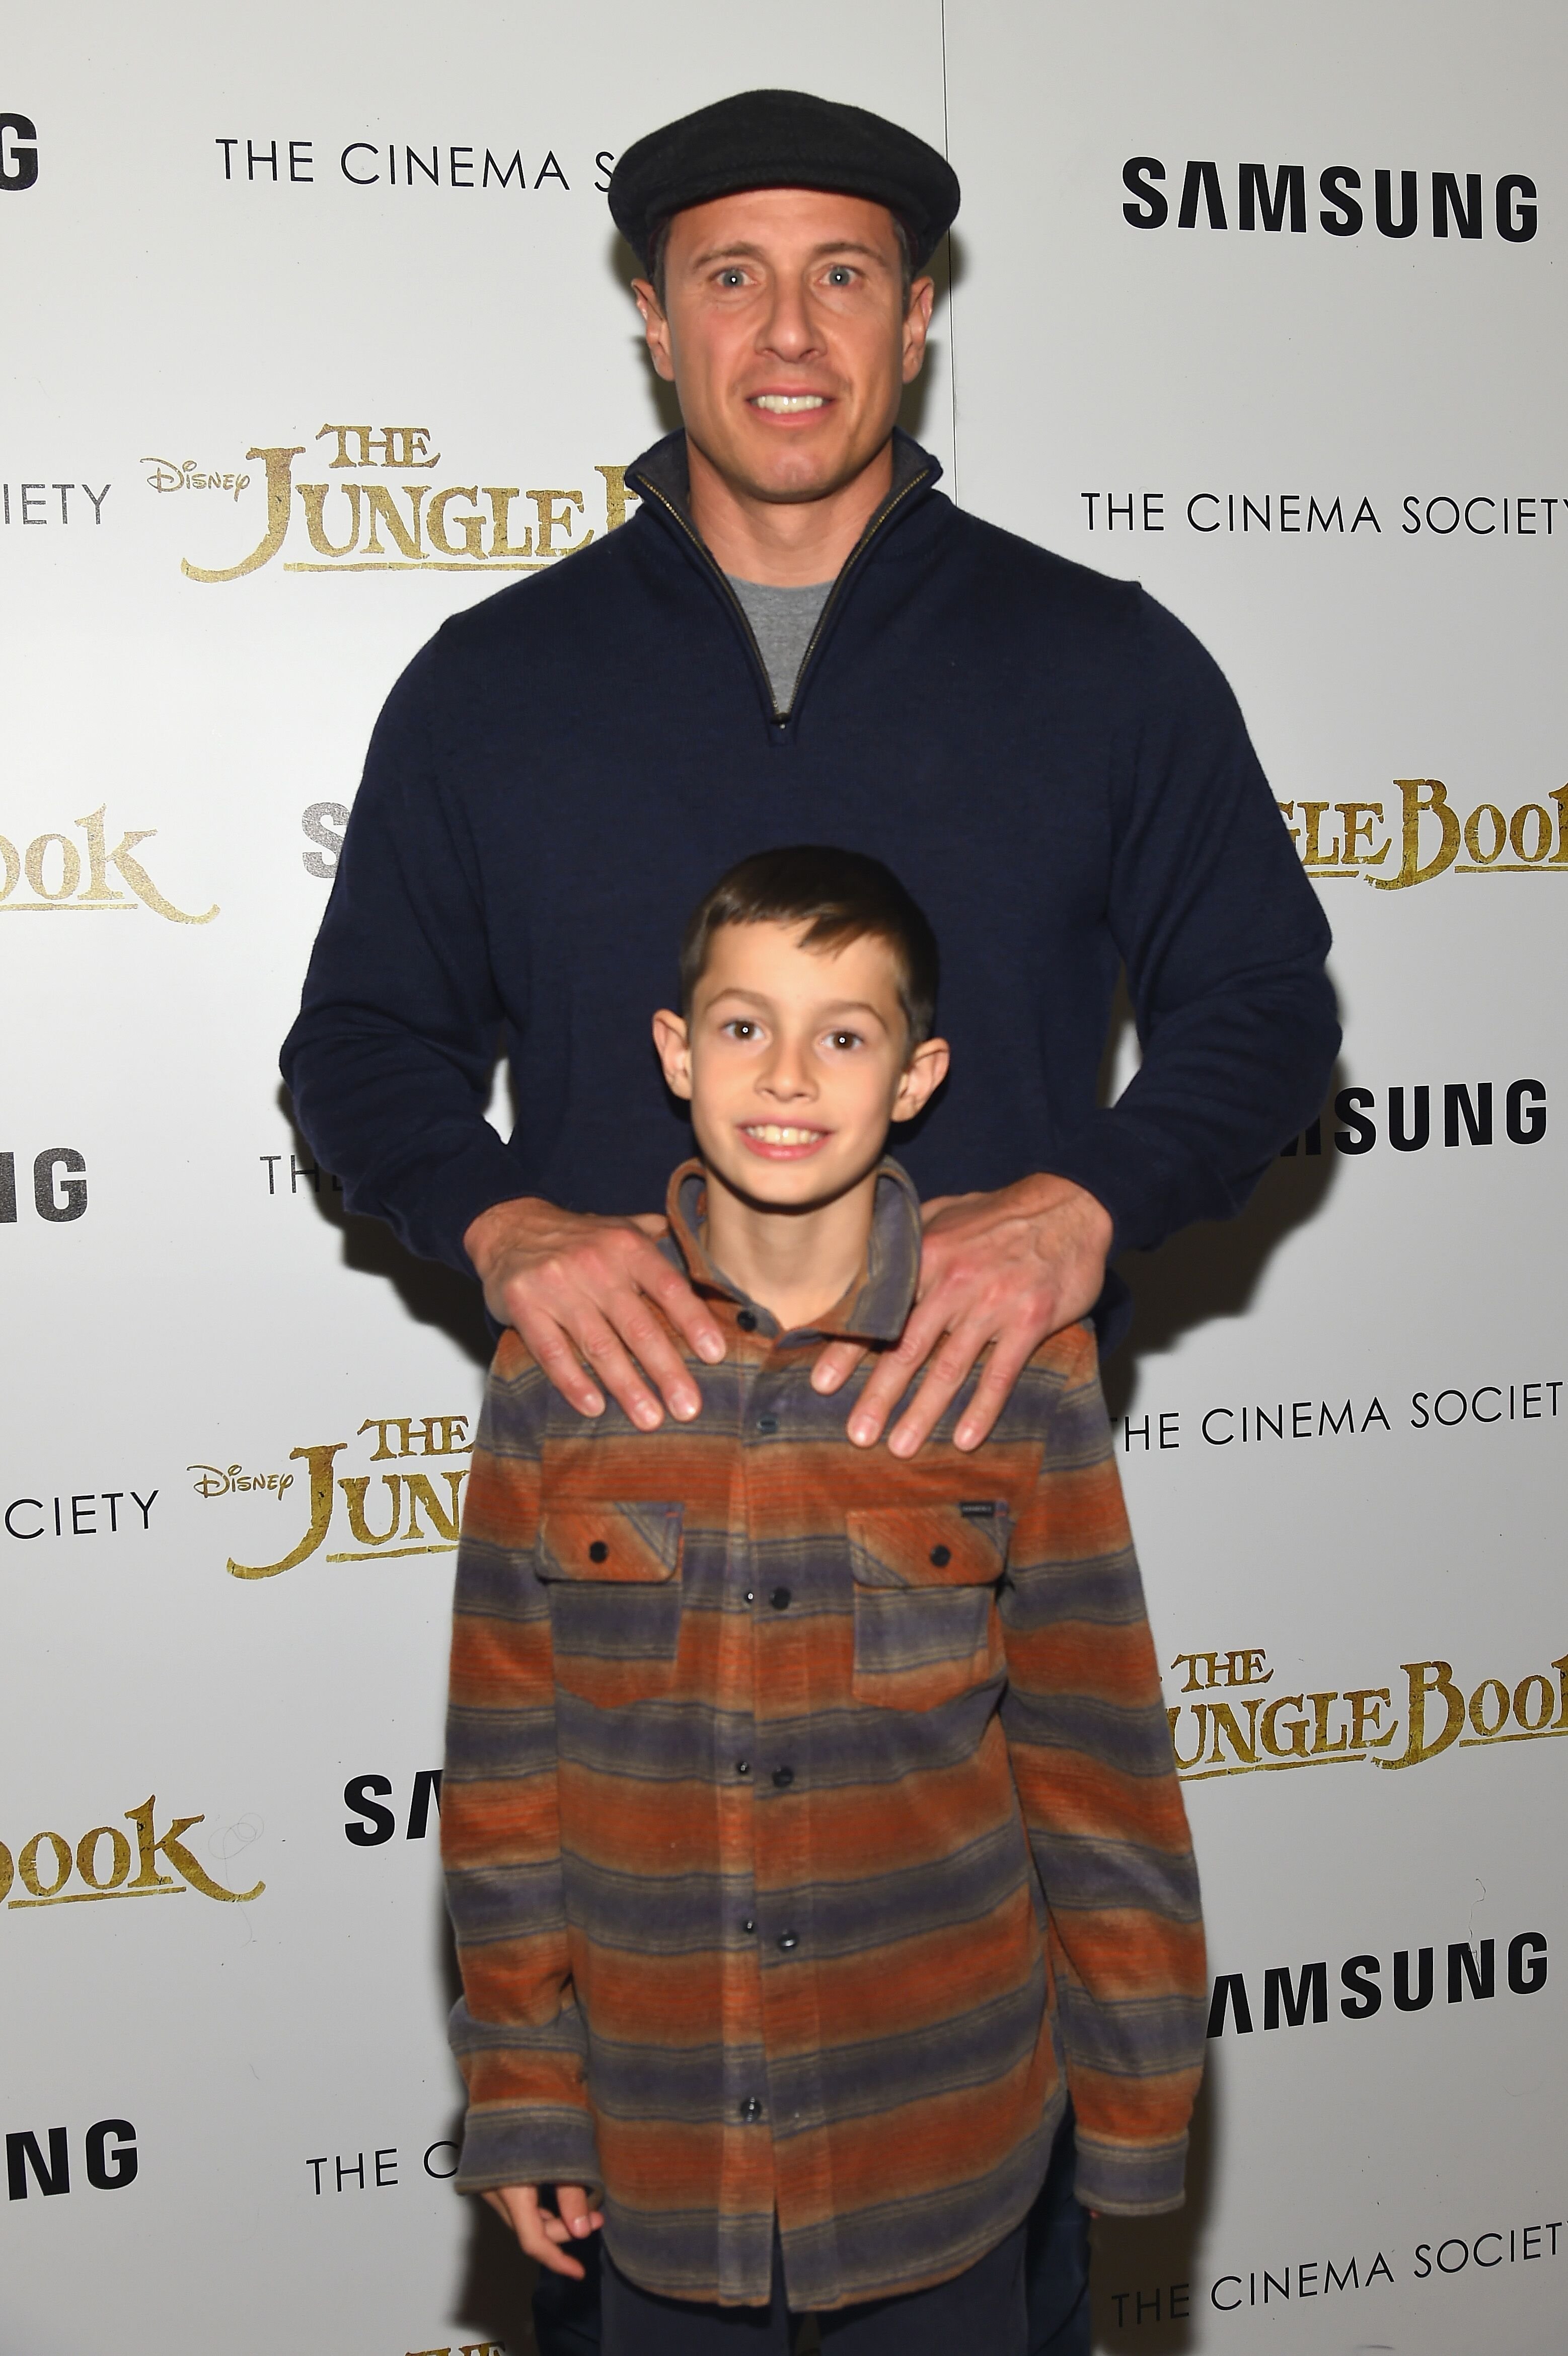 Chris and son Mario Cuomo at the screening of "The Jungle Book" at AMC Empire 25 theater on April 7, 2016, in New York City | Photo: Ben Gabbe/Getty Images